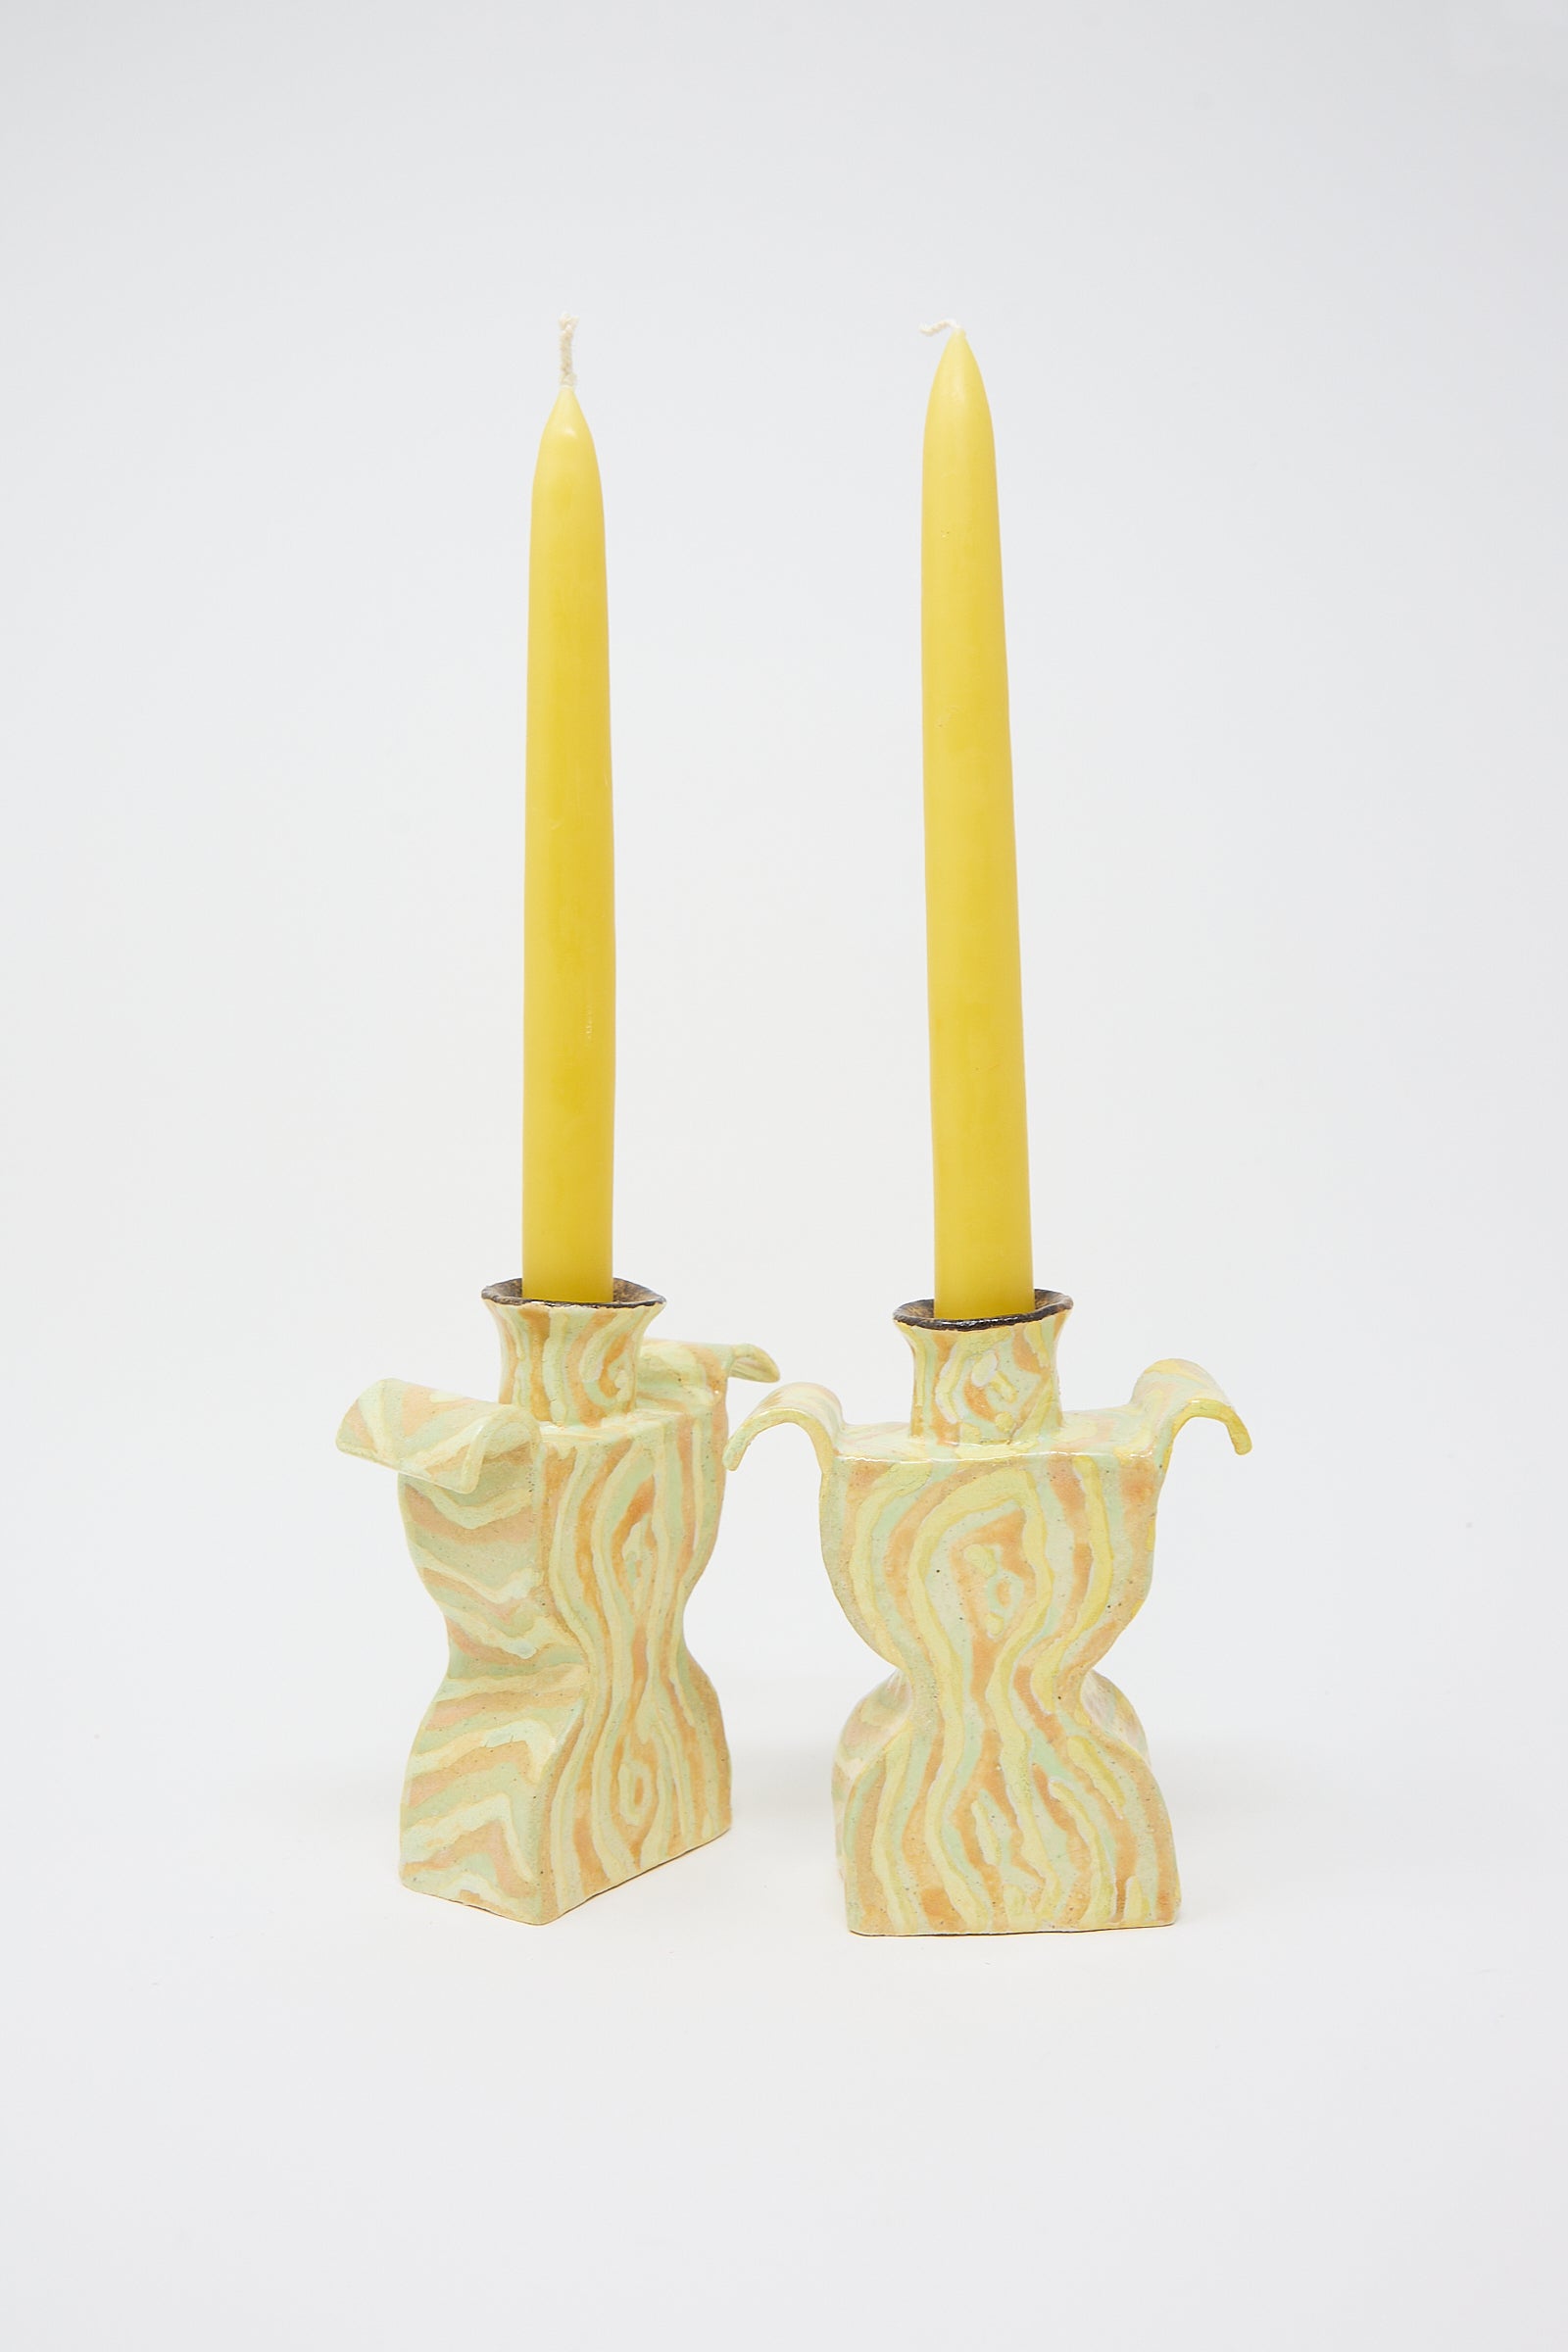 Two Pearce Williams woodgrain candlesticks pair in matching swirl-patterned handcrafted ceramic candle holders on a white background.